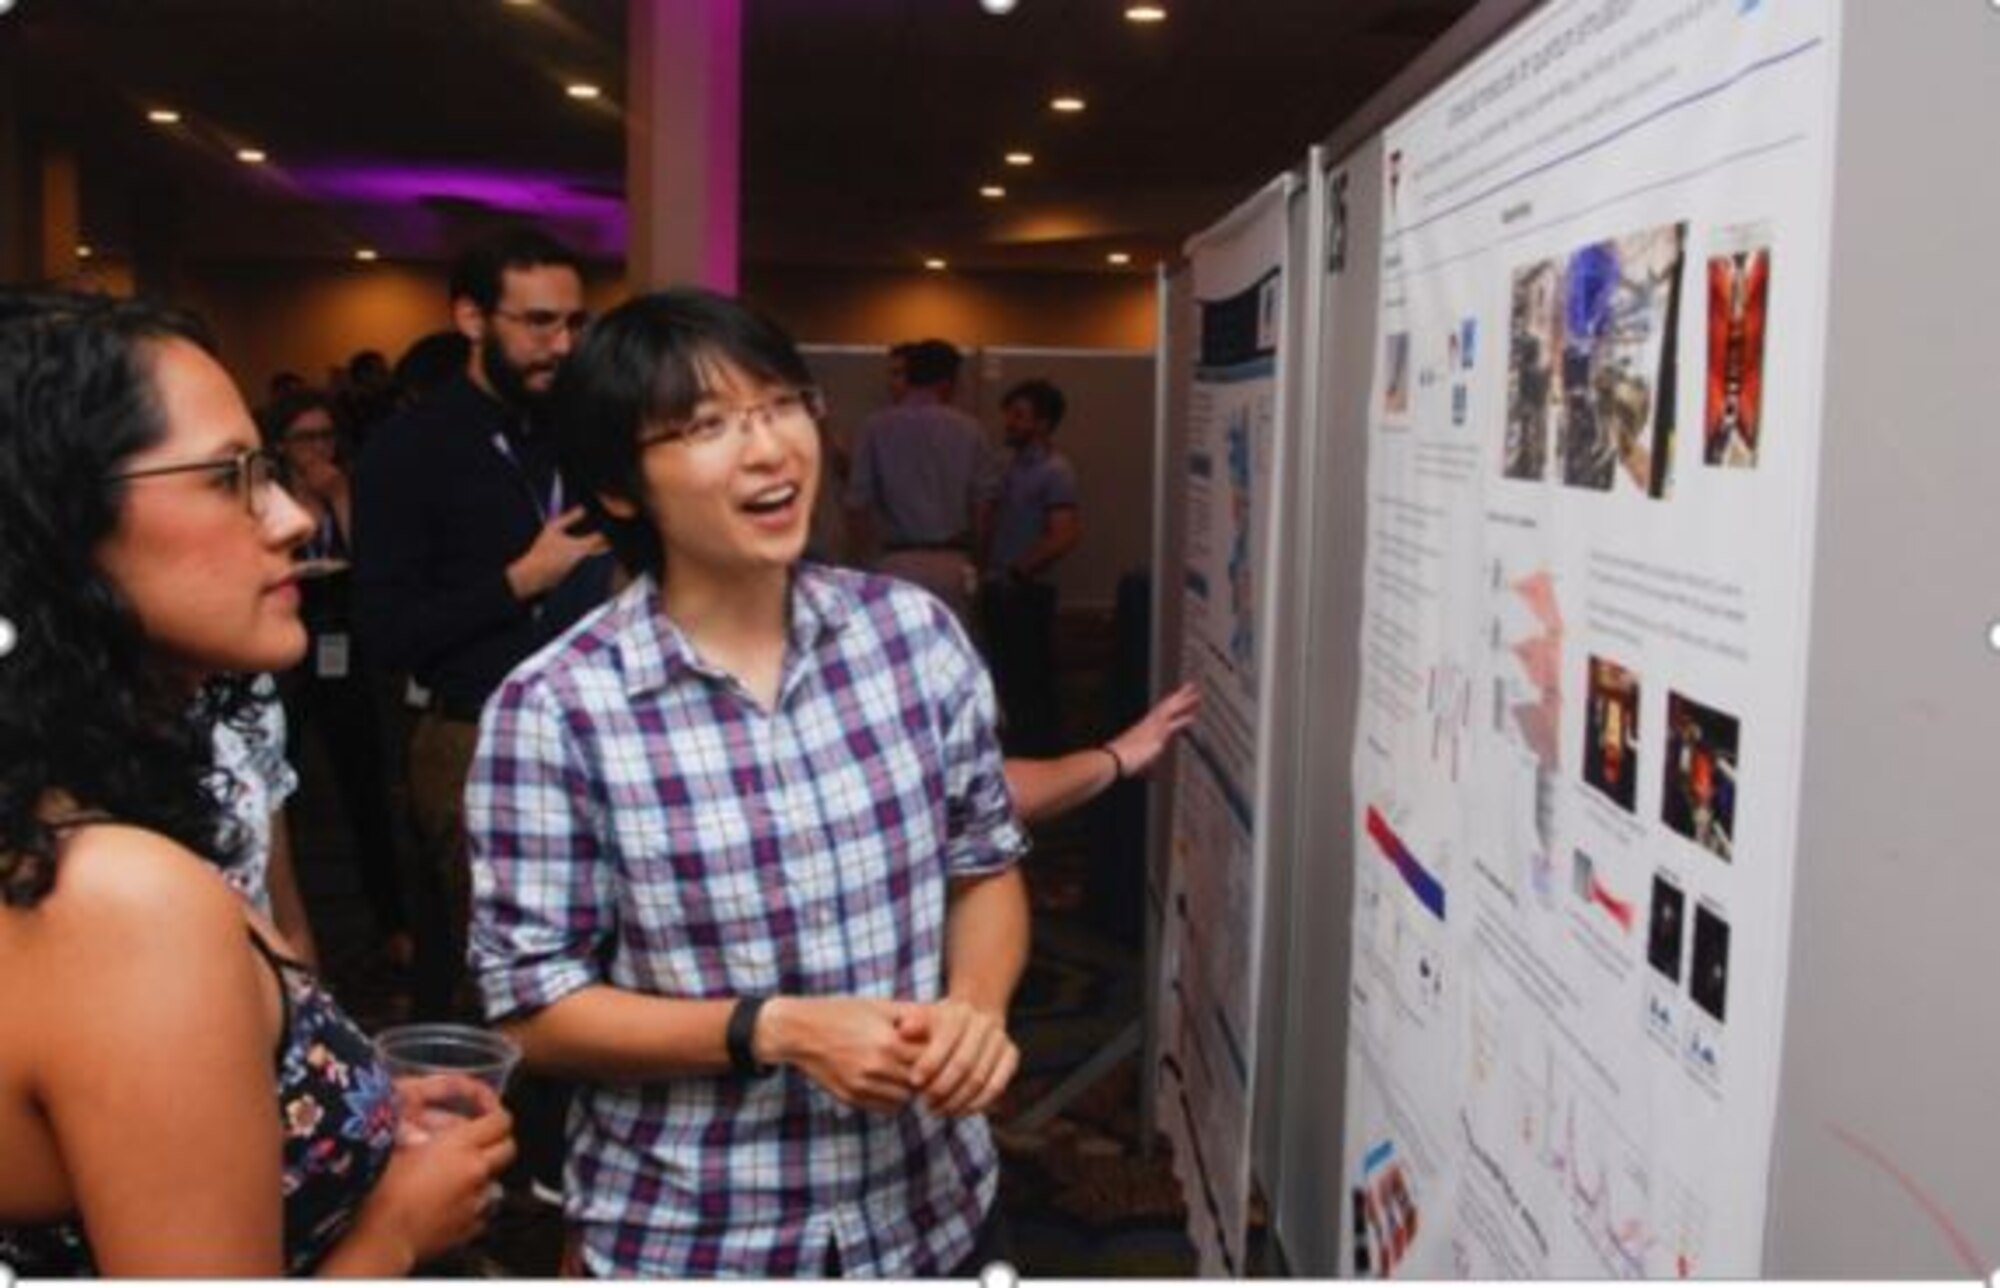 National Defense Science and Engineering Graduate Fellowship Program kicked off with a welcome reception followed by poster presentations from the Class of 2019 fellows. (U.S. Air Force photo/Brianna Hodges)